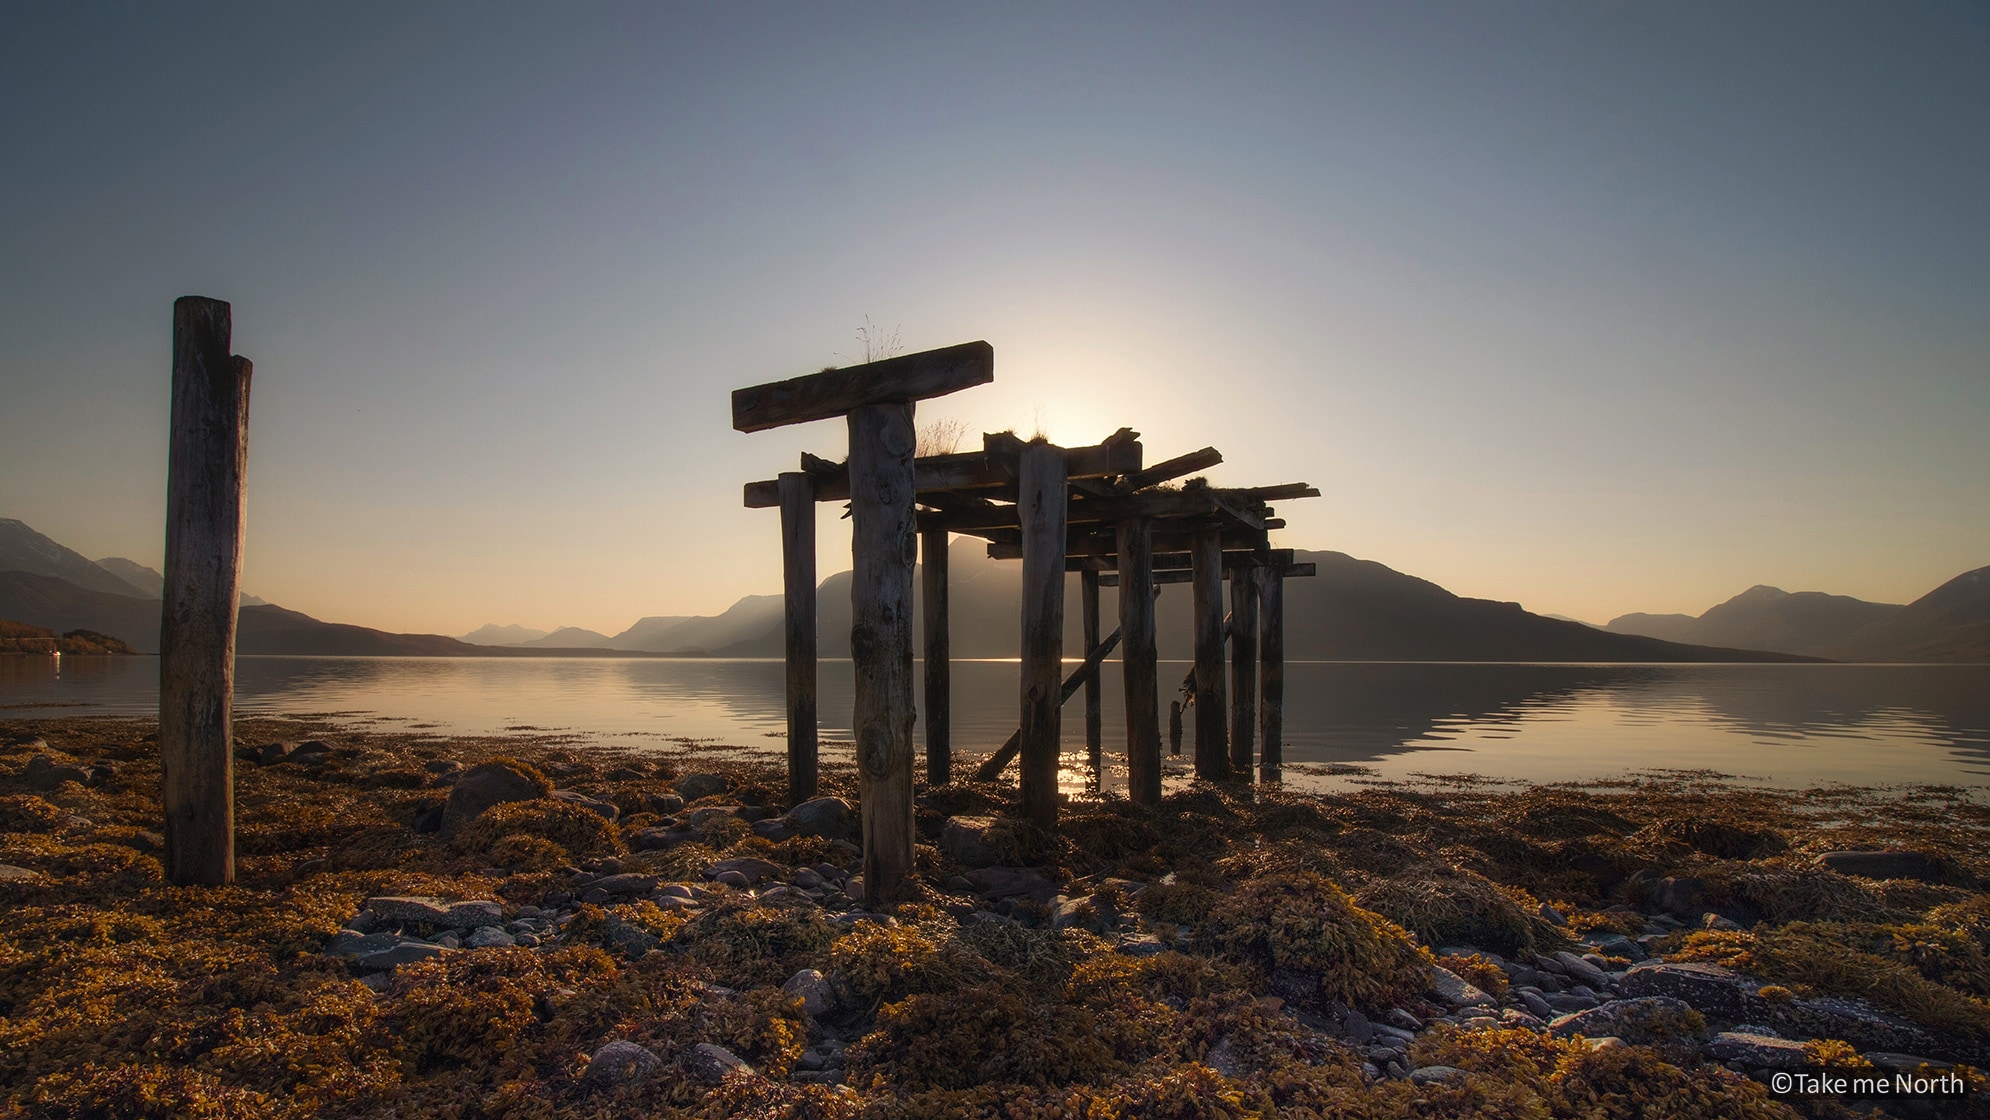 Remains of a pier, Norland Norway